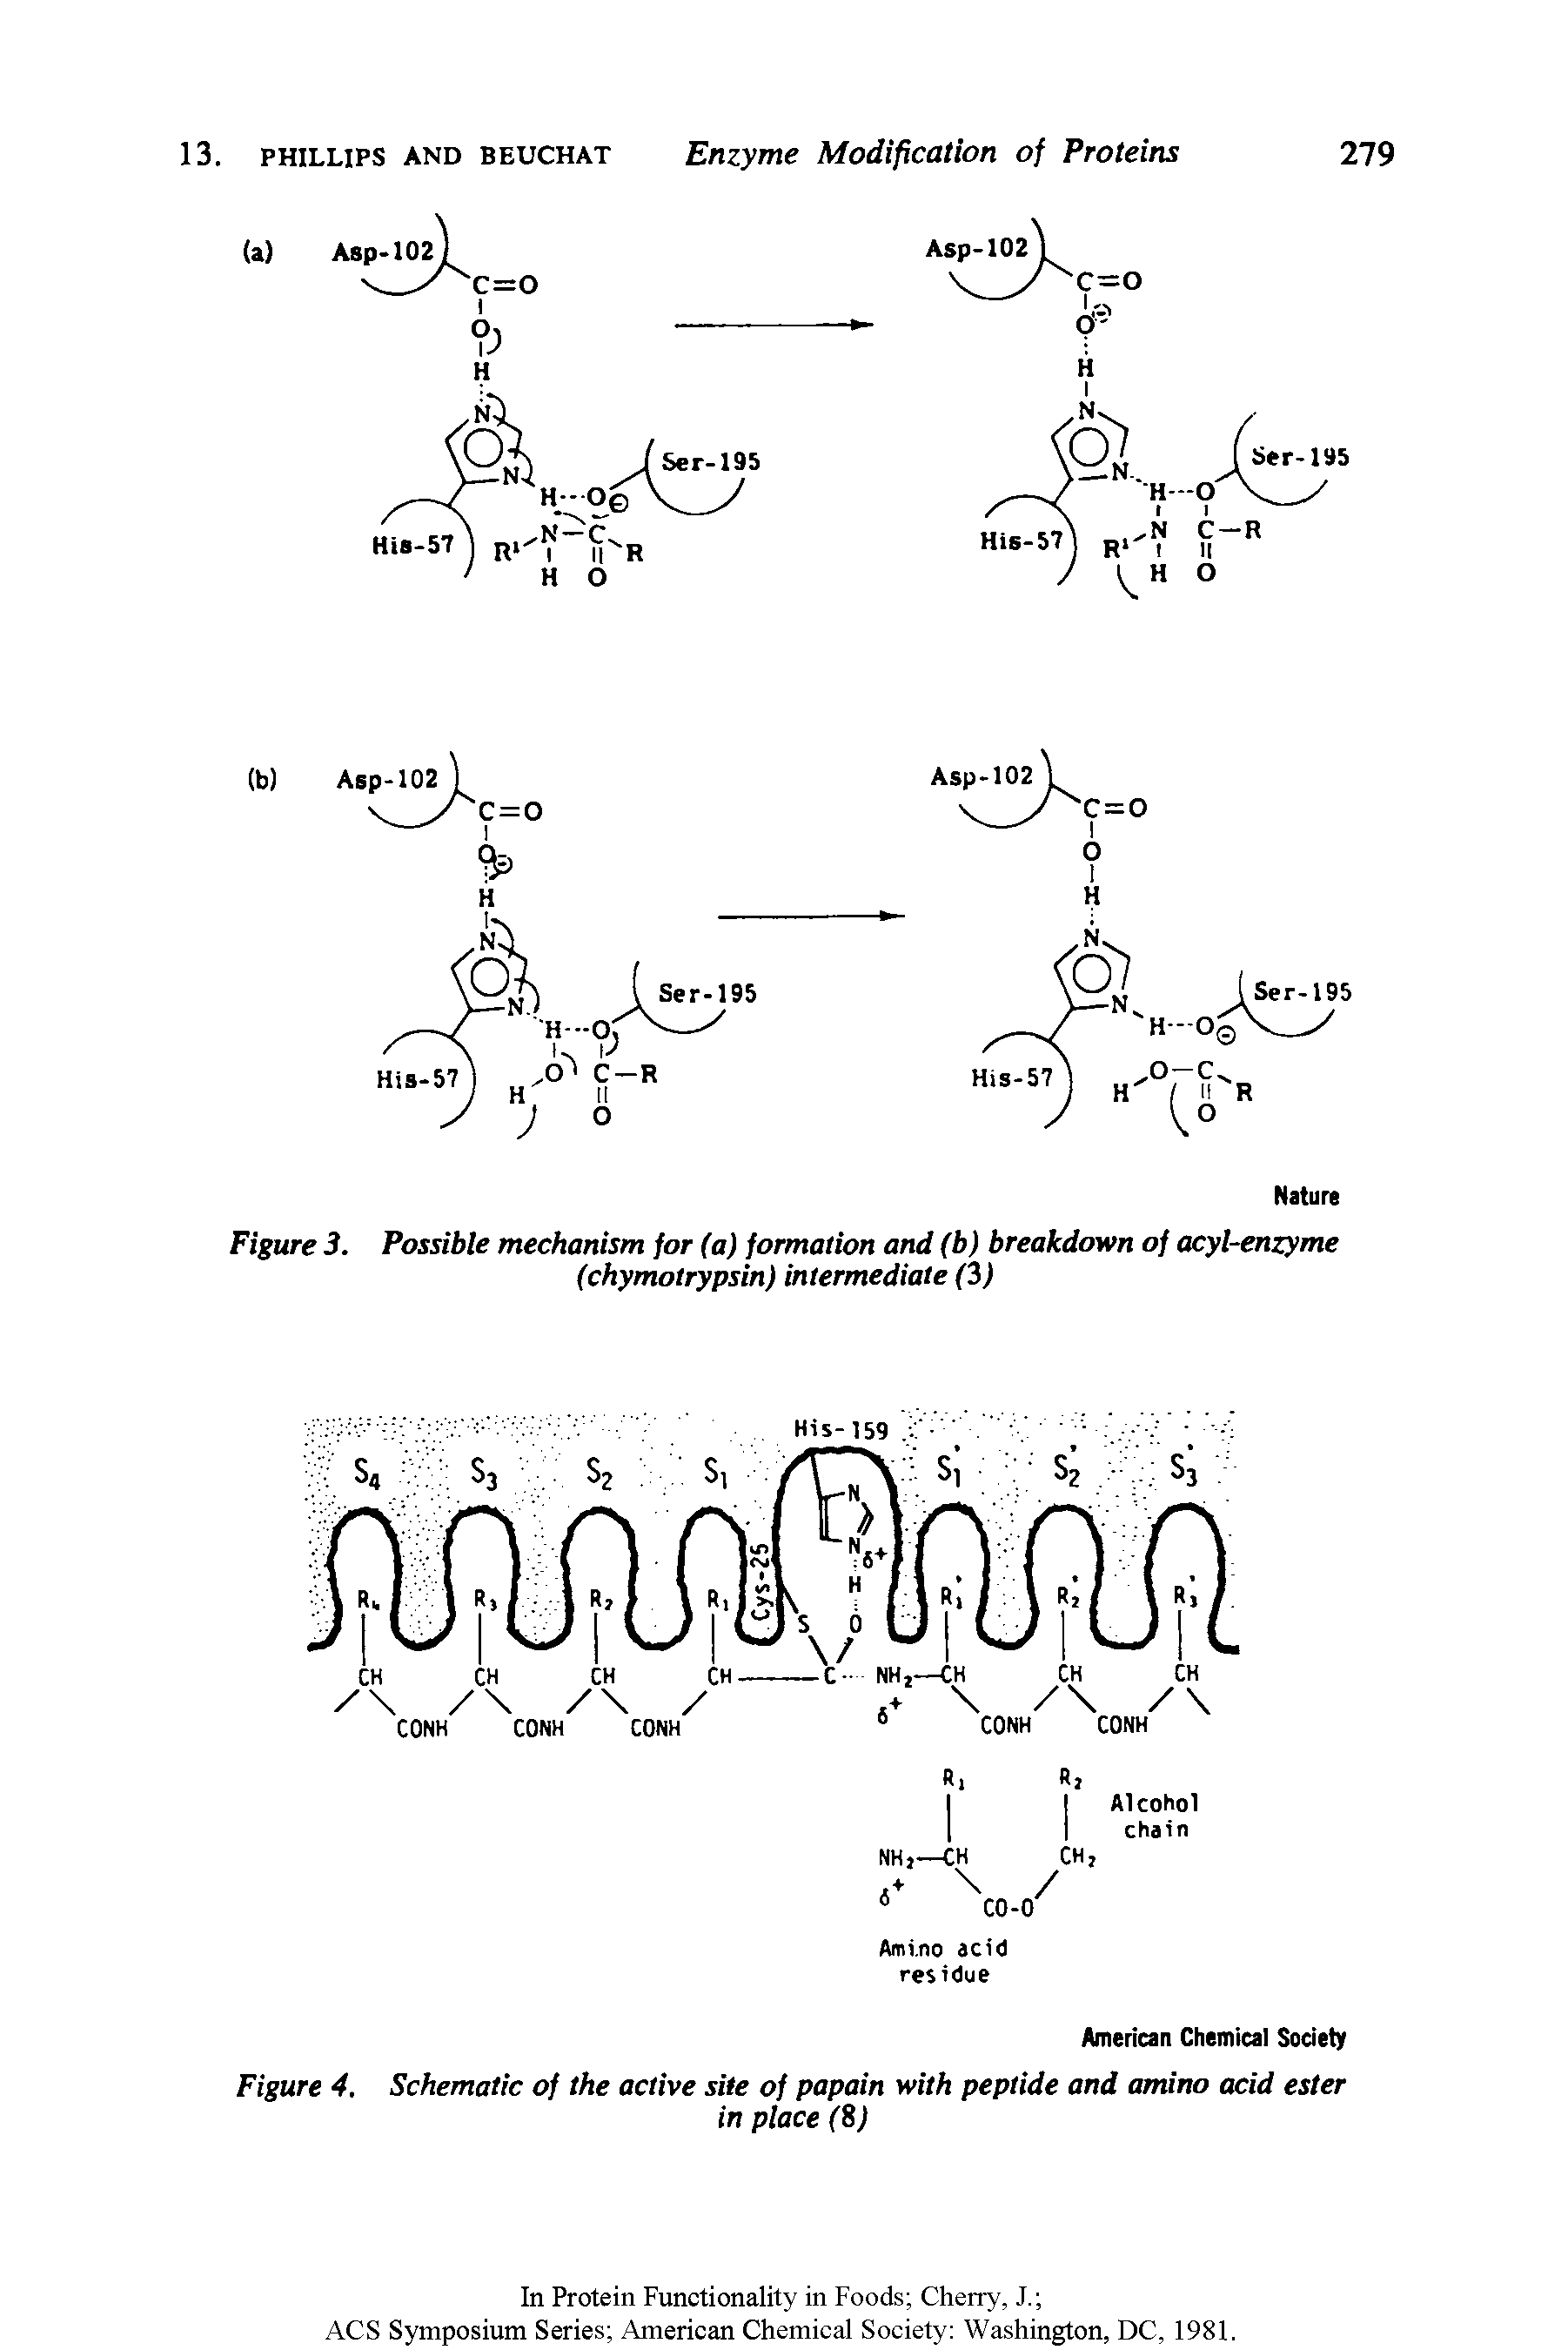 Figure 3. Possible mechanism for (a) formation and (b) breakdown of acyl-enzyme (chymotrypsin) intermediate (3)...